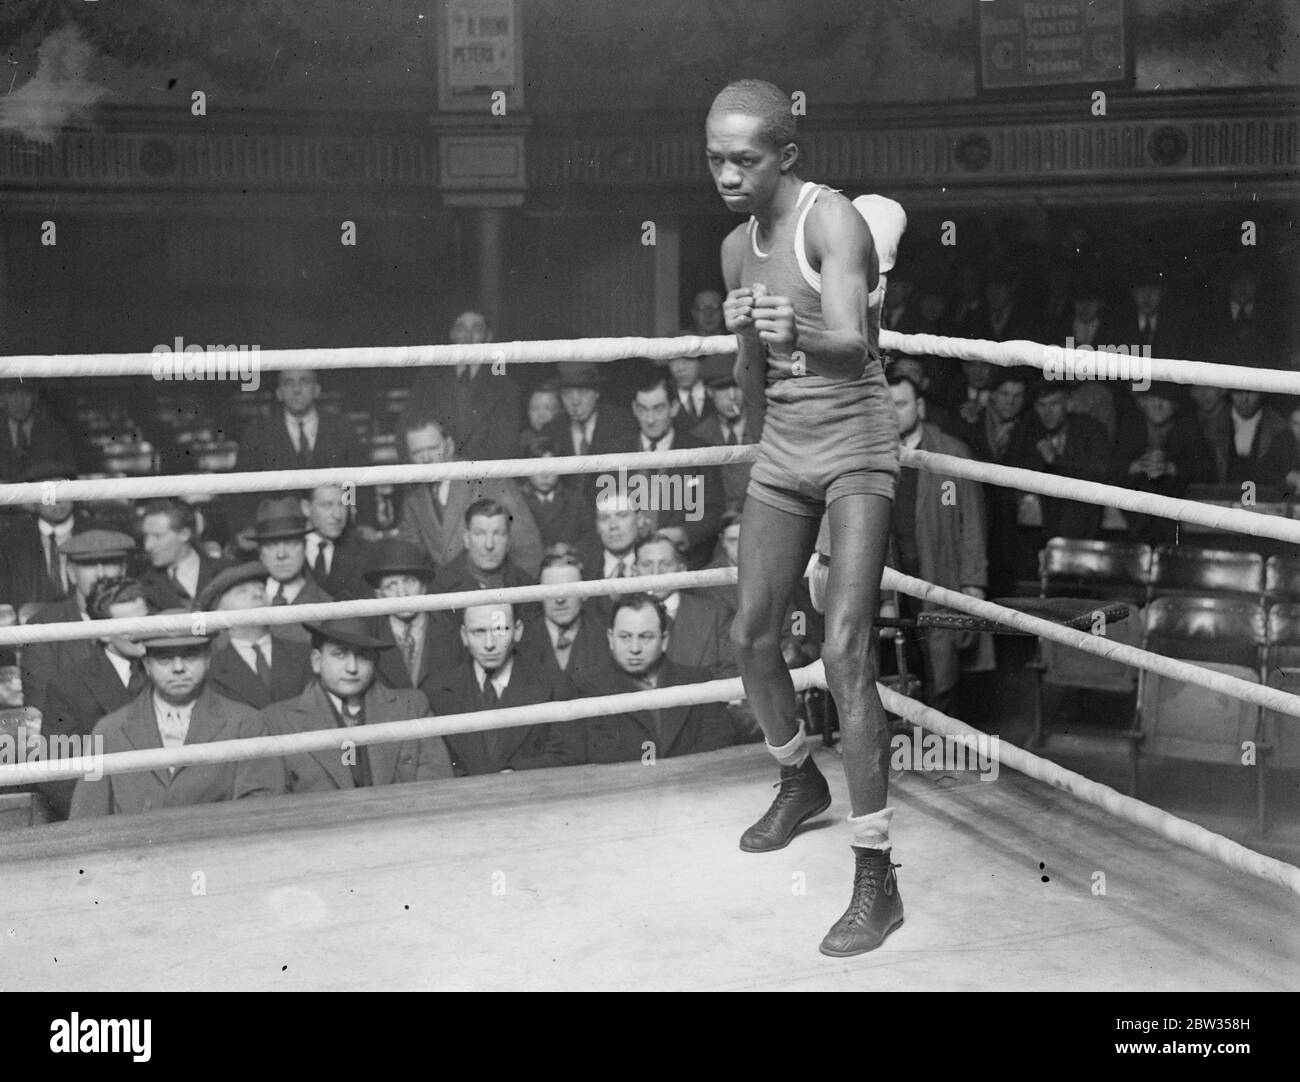 AL brown trains at the ring in London . Al Brown , the world ' s bantam champion trained at the Ring , London , for his fight with Johnny Peters . Admirers surround Al Brown during his training . 4 March 1933 Stock Photo